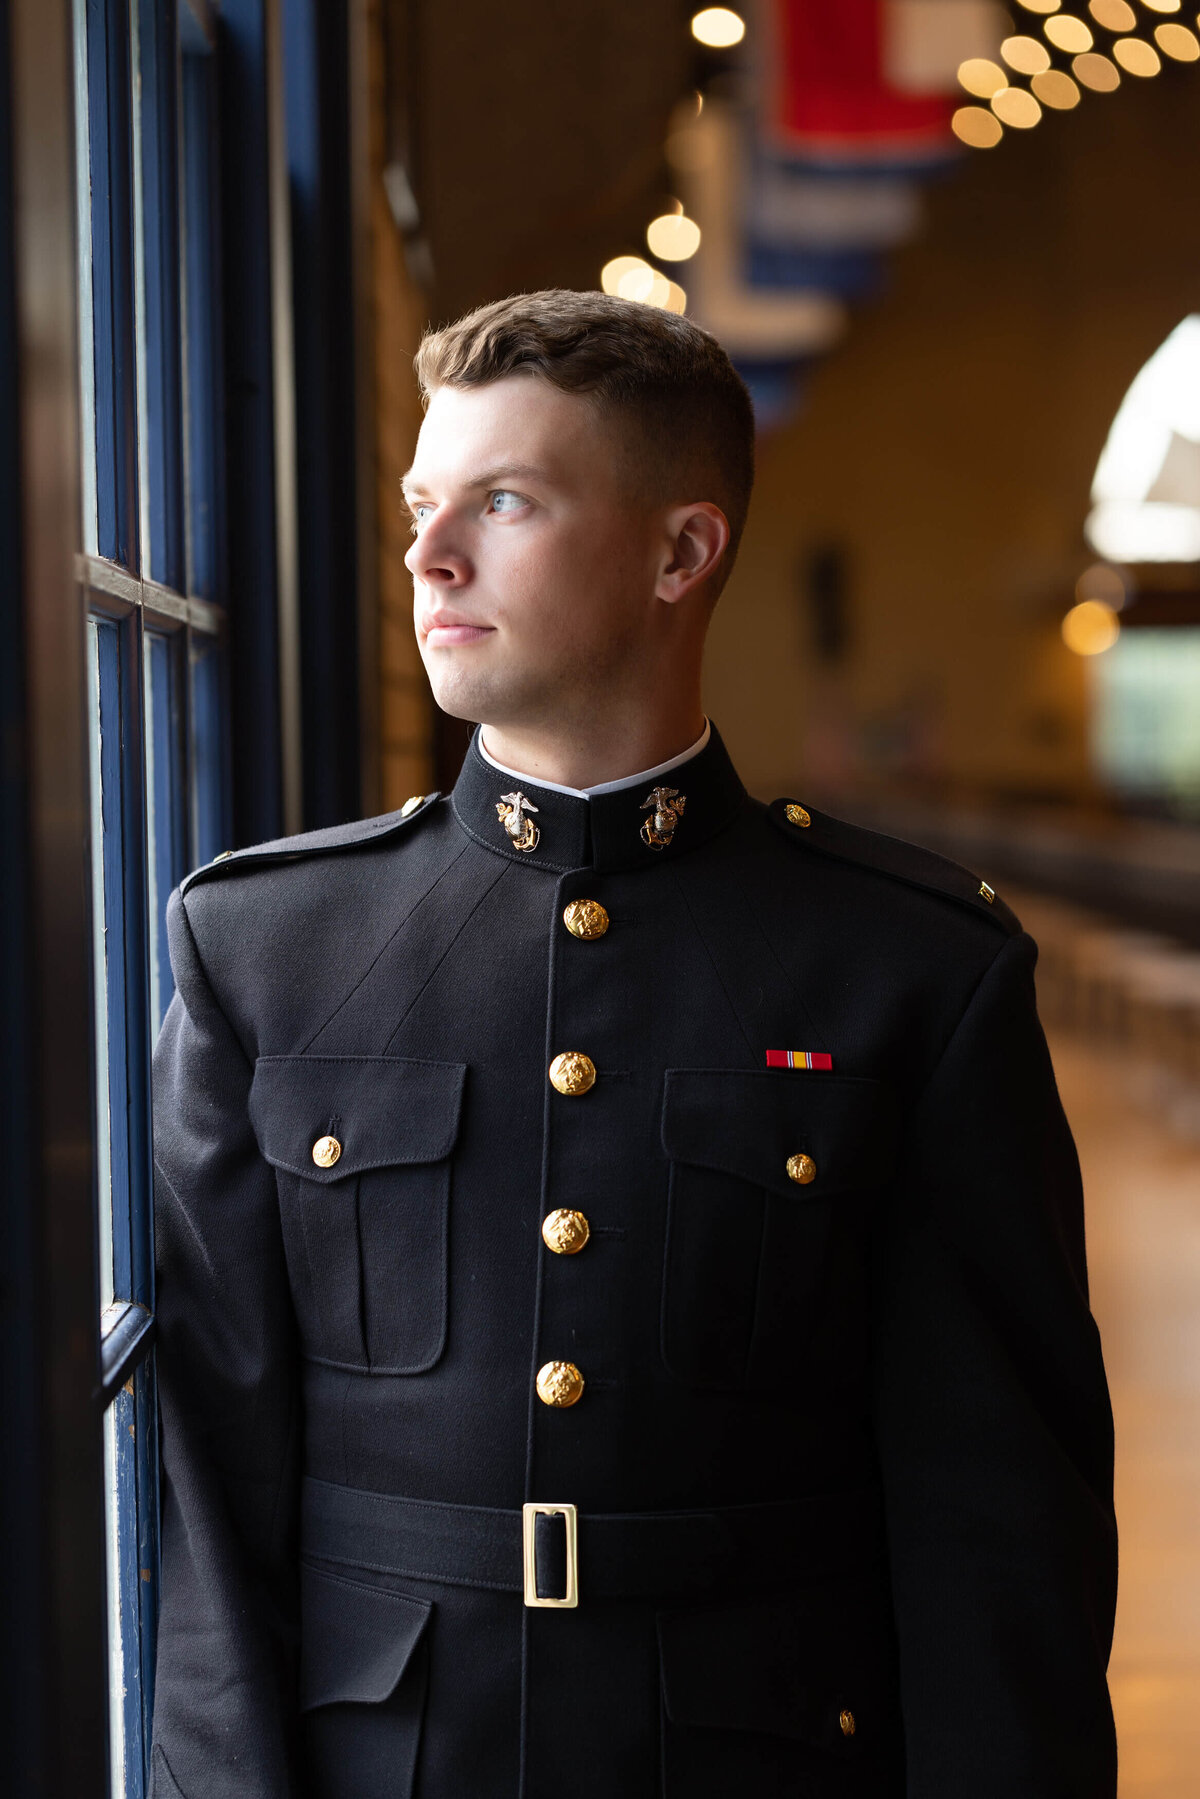 Midshipman Marine poses for a pensive senior photo near the window in Dahlgren Hall at Naval Academy.